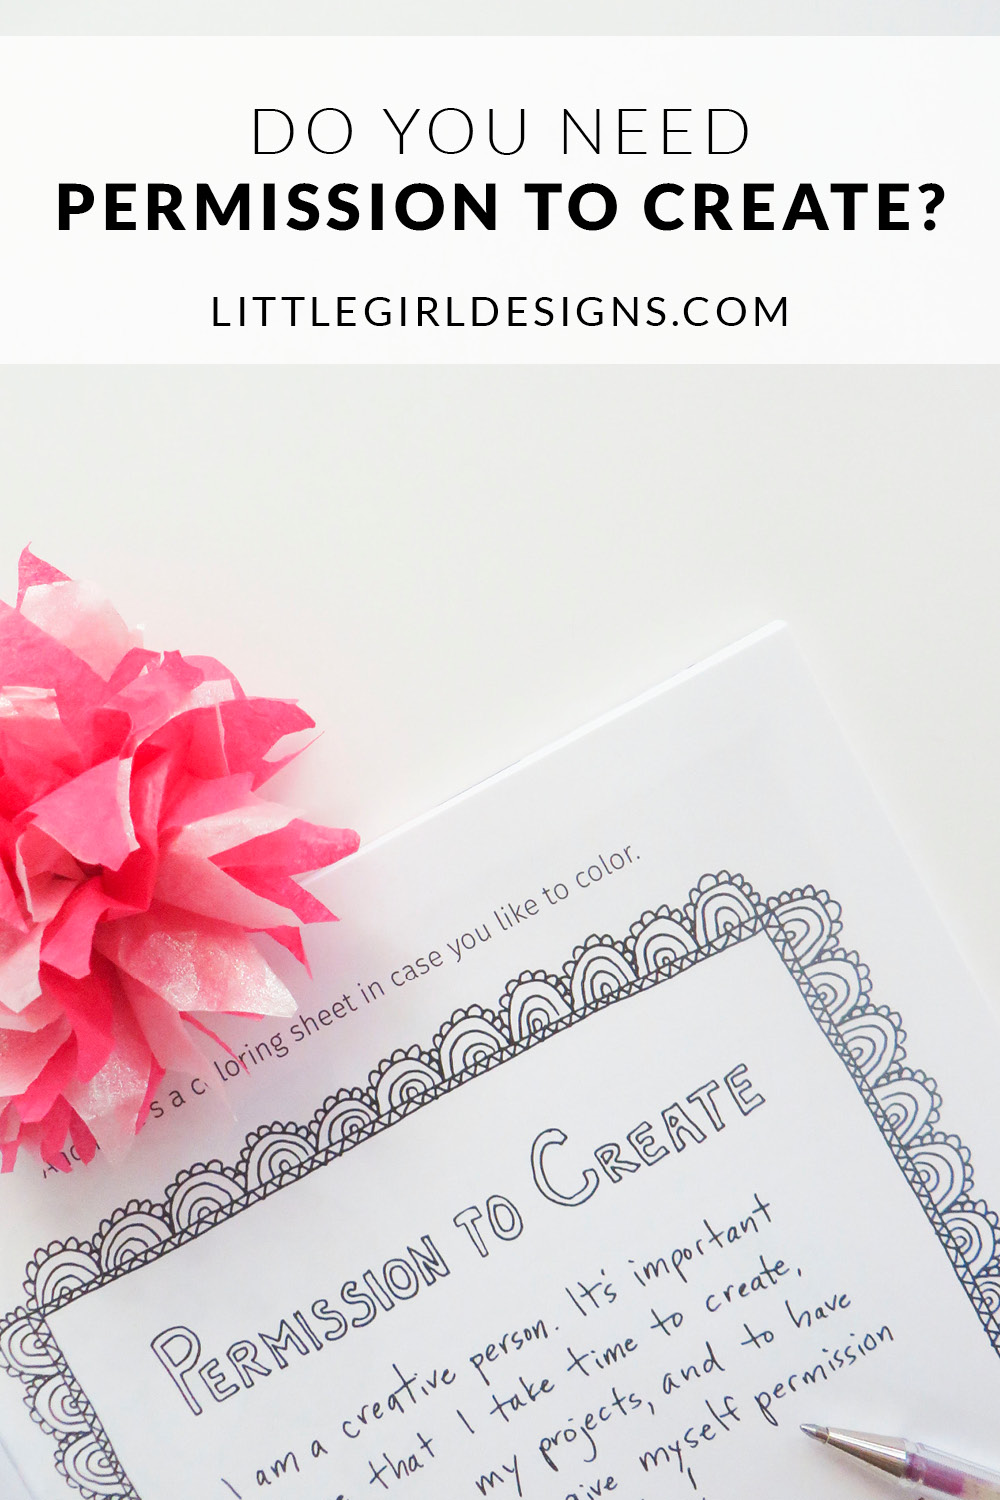 Sometimes we need permission to create, right? So here's your gentle nudge, a bit of encouragement, and my story (since I need it too!) Plus a peek into my NEW book! via littlegirldesigns.com